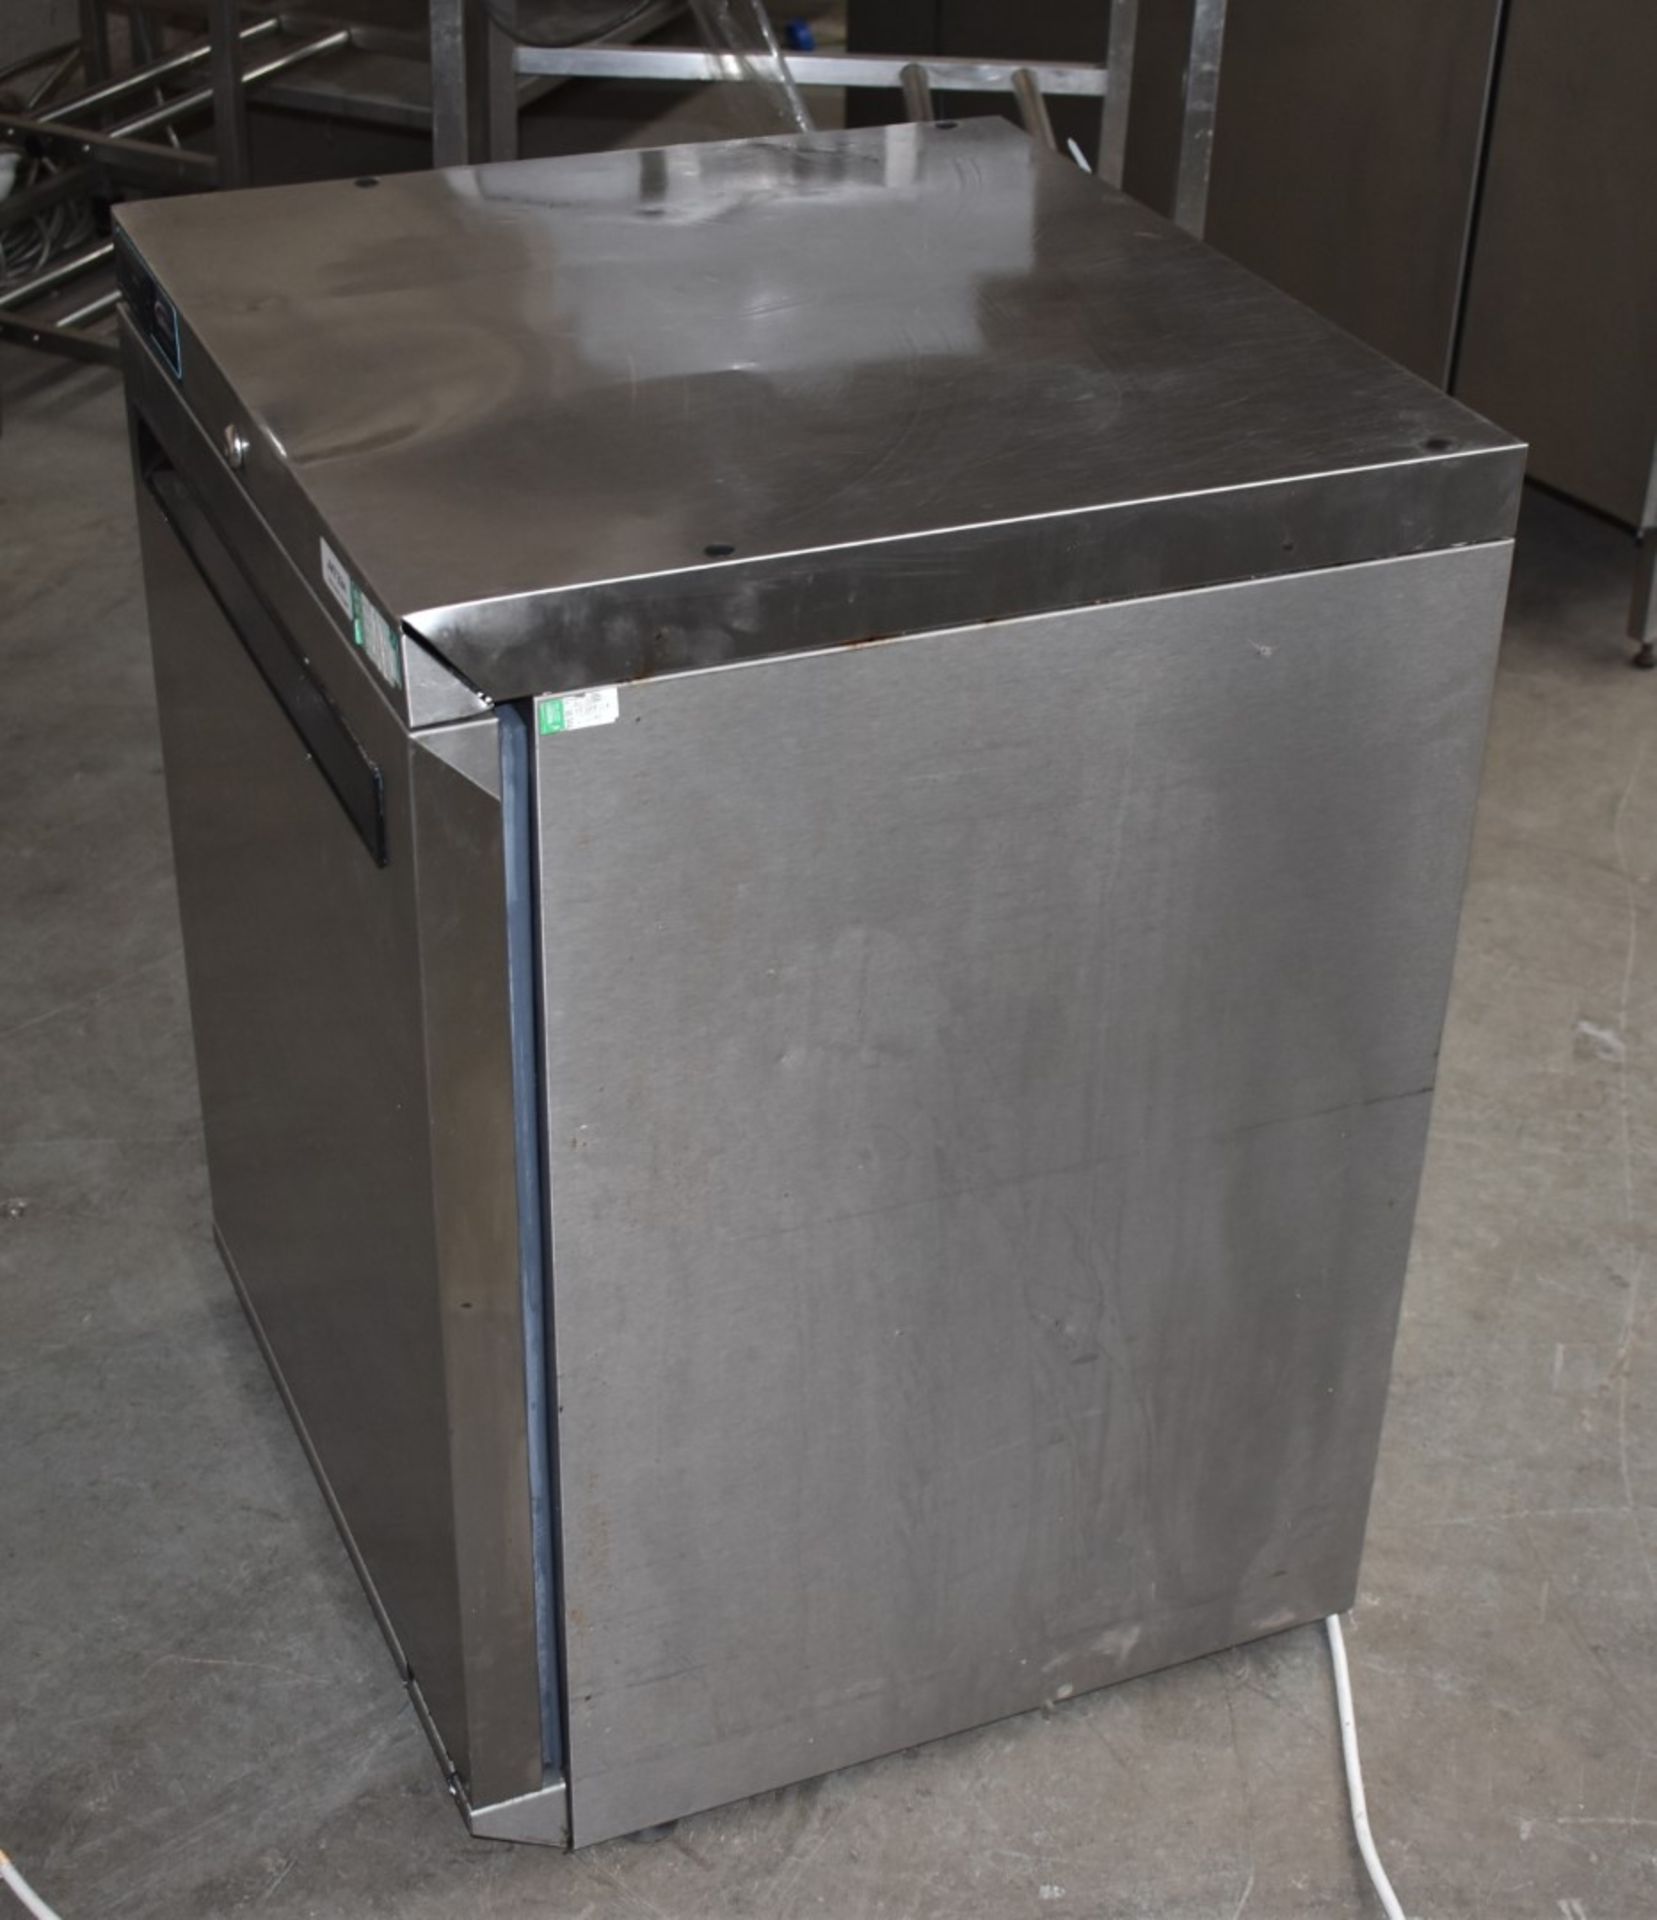 1 x Williams HA135SA Undercounter Refrigerator With Stainless Steel Exterior - Dimensions: H80 x W60 - Image 7 of 8